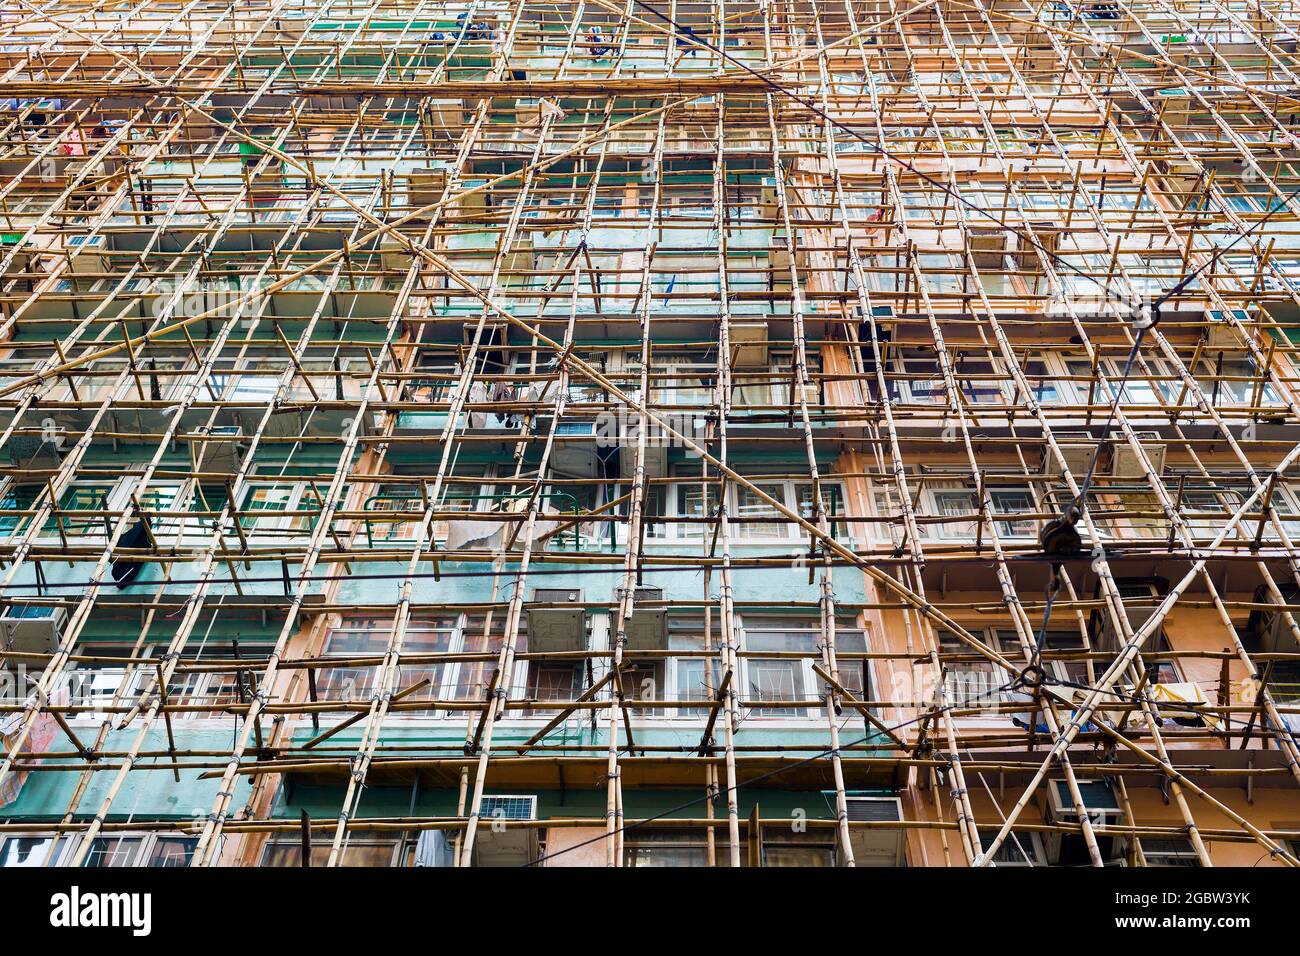 TRaditional bamboo scaffoldings around a building in Hong Kong, China Stock Photo